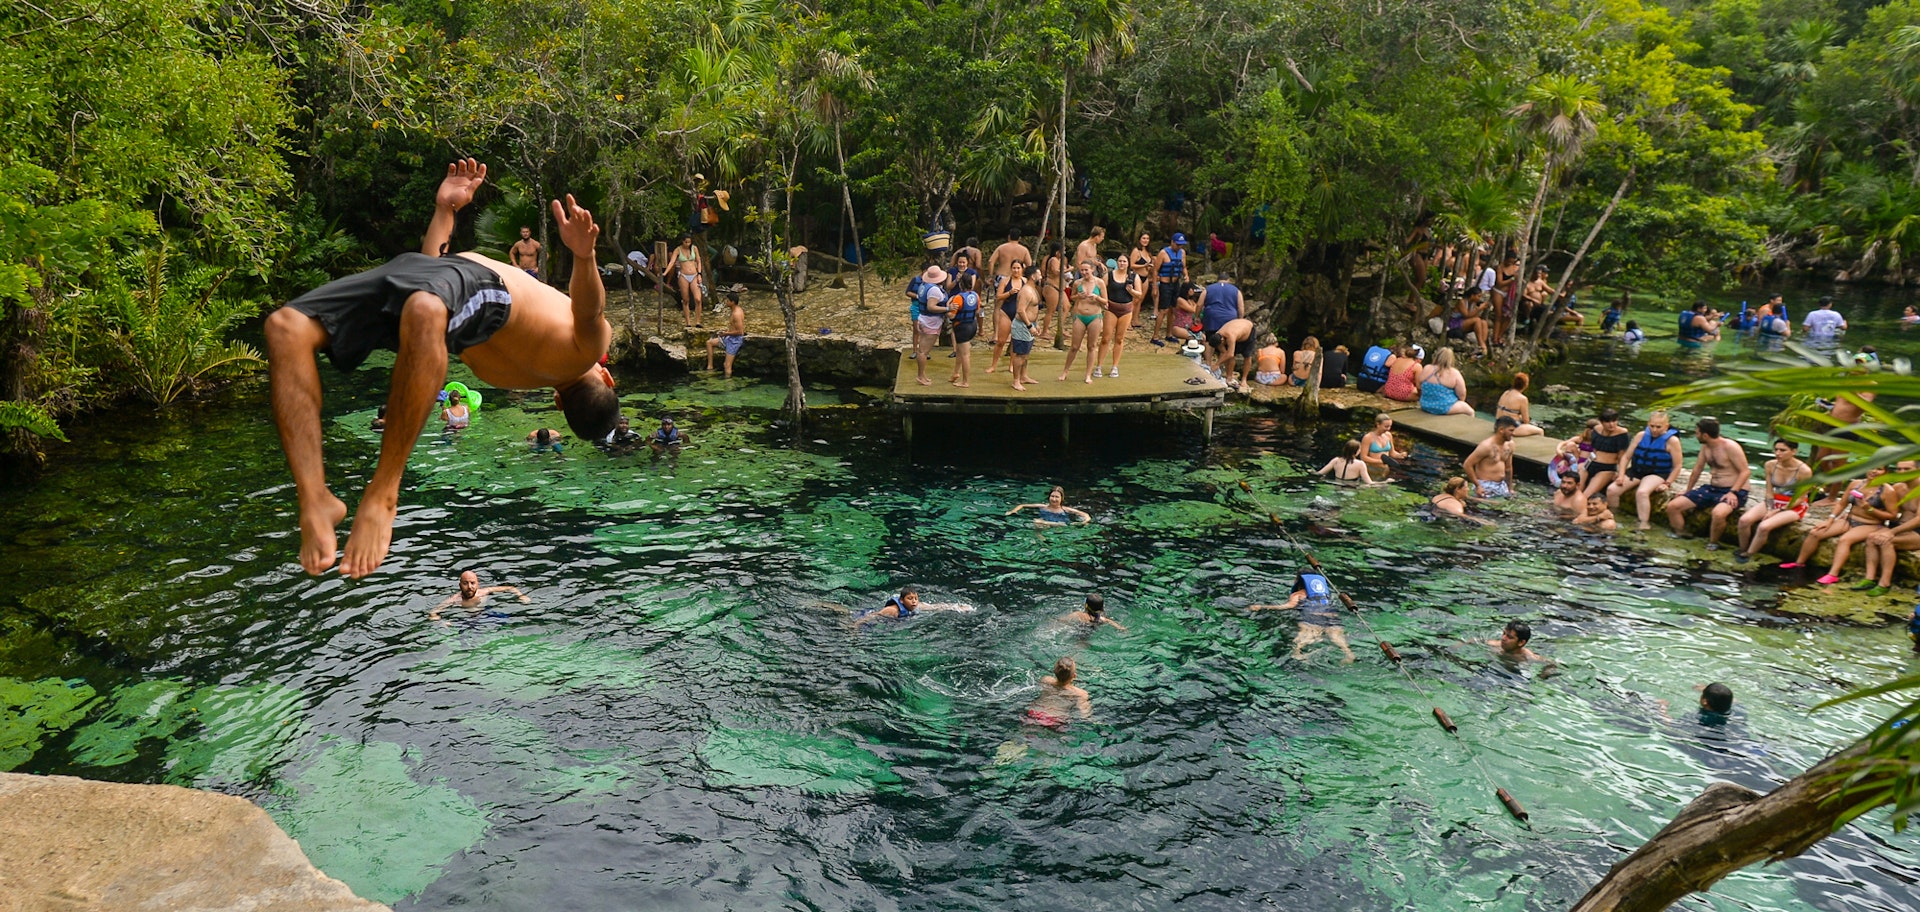 People swim and a boy jumps off a cliff into the water of Cenote Azul, one of the most popular cenotes in the Riviera Maya